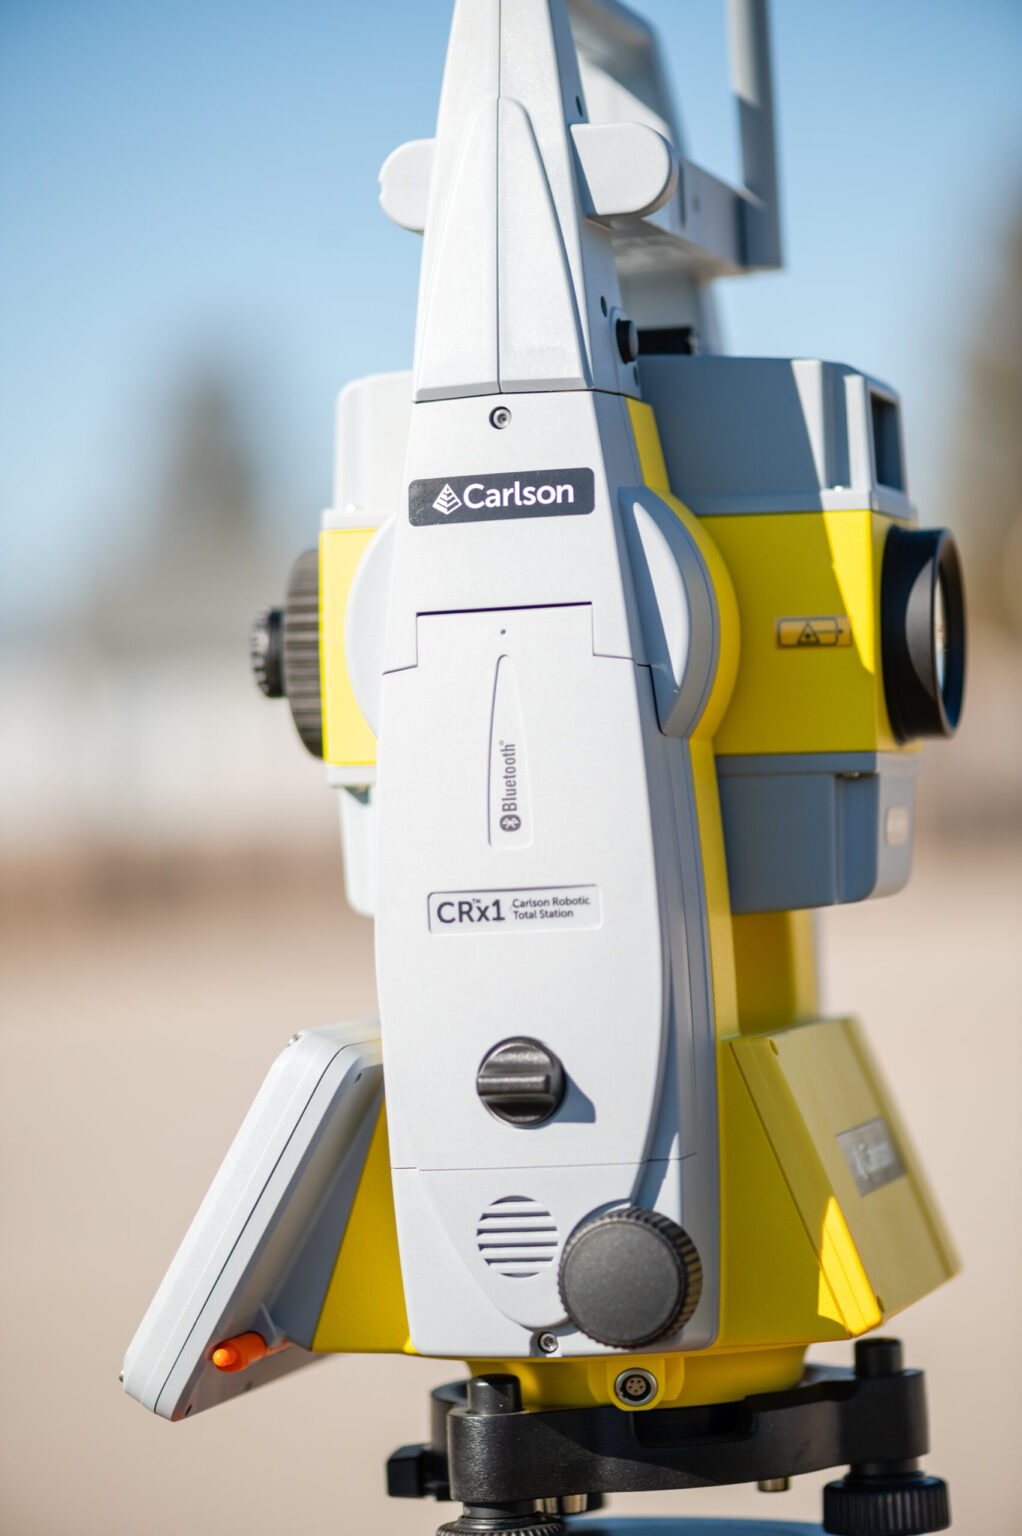 A surveying instrument